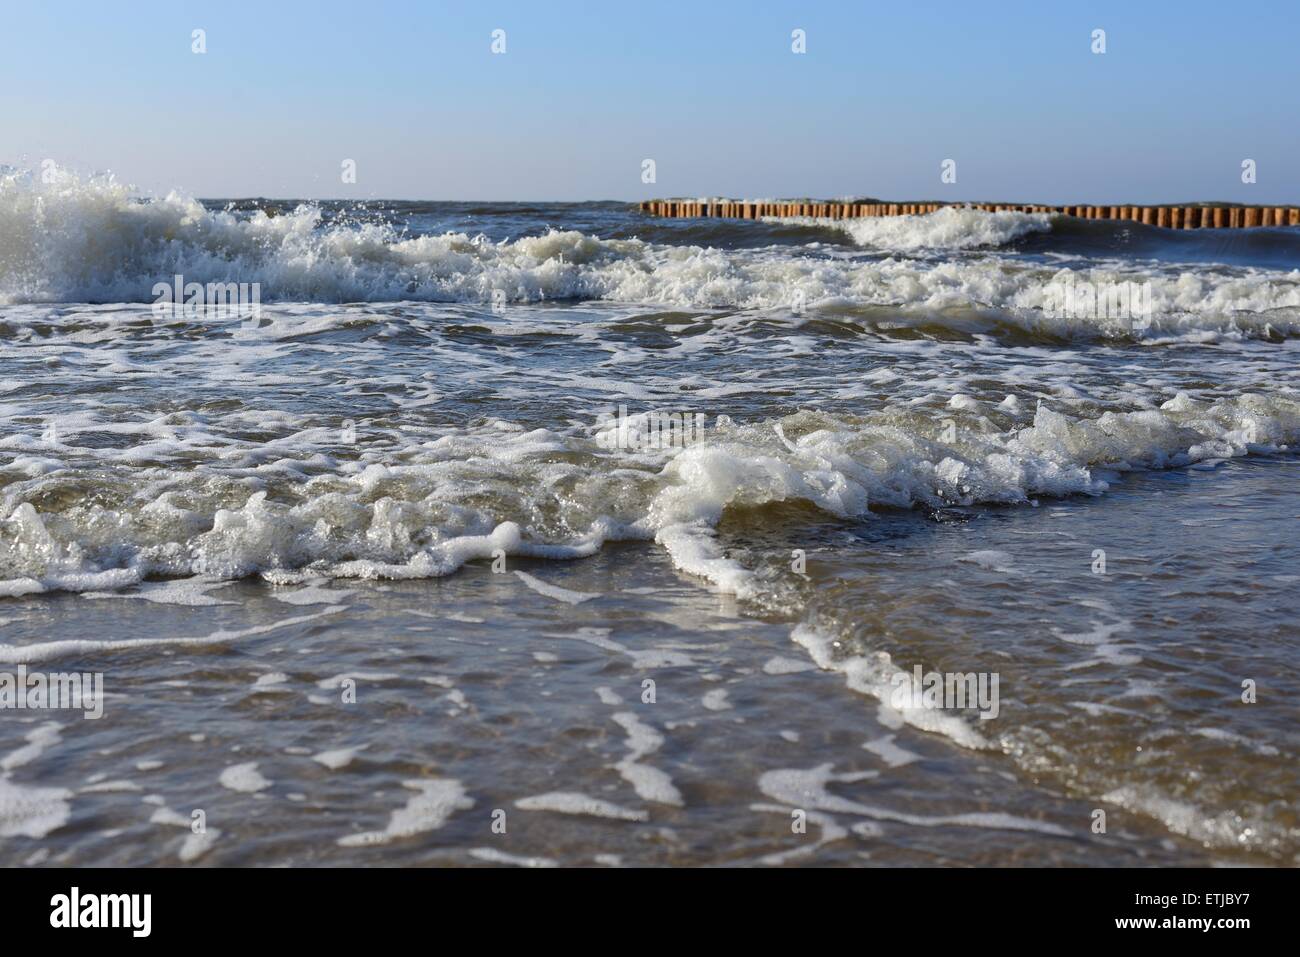 Waves on the beach with wooden wave breakers in the background Stock Photo